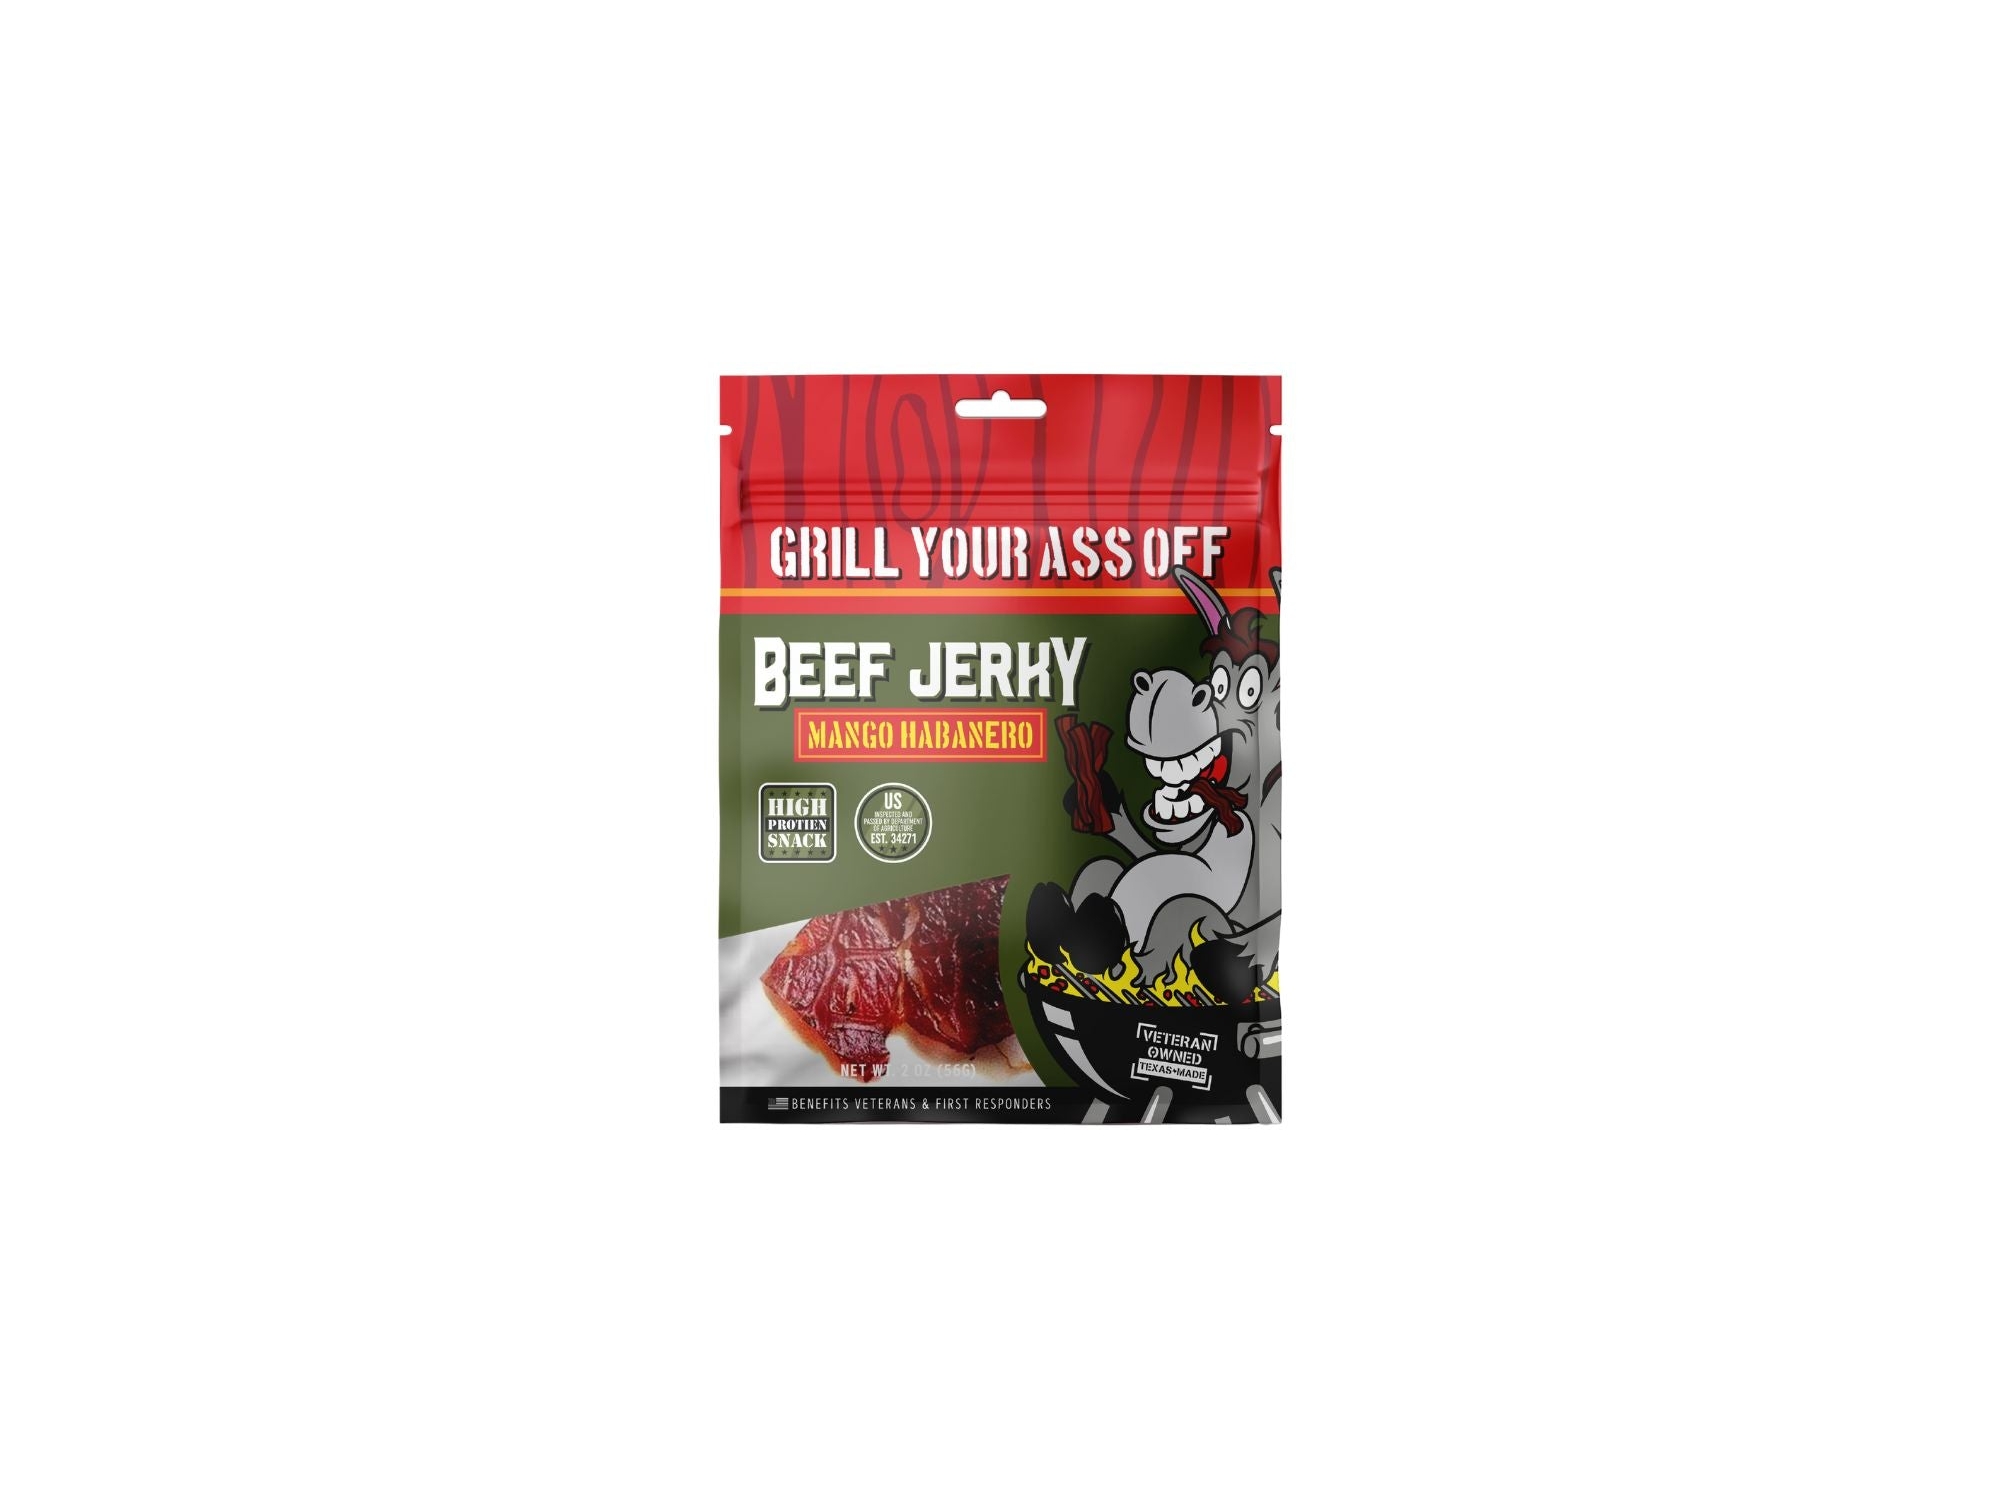 Grill Your Ass Off Mango Habanero Beef Jerky